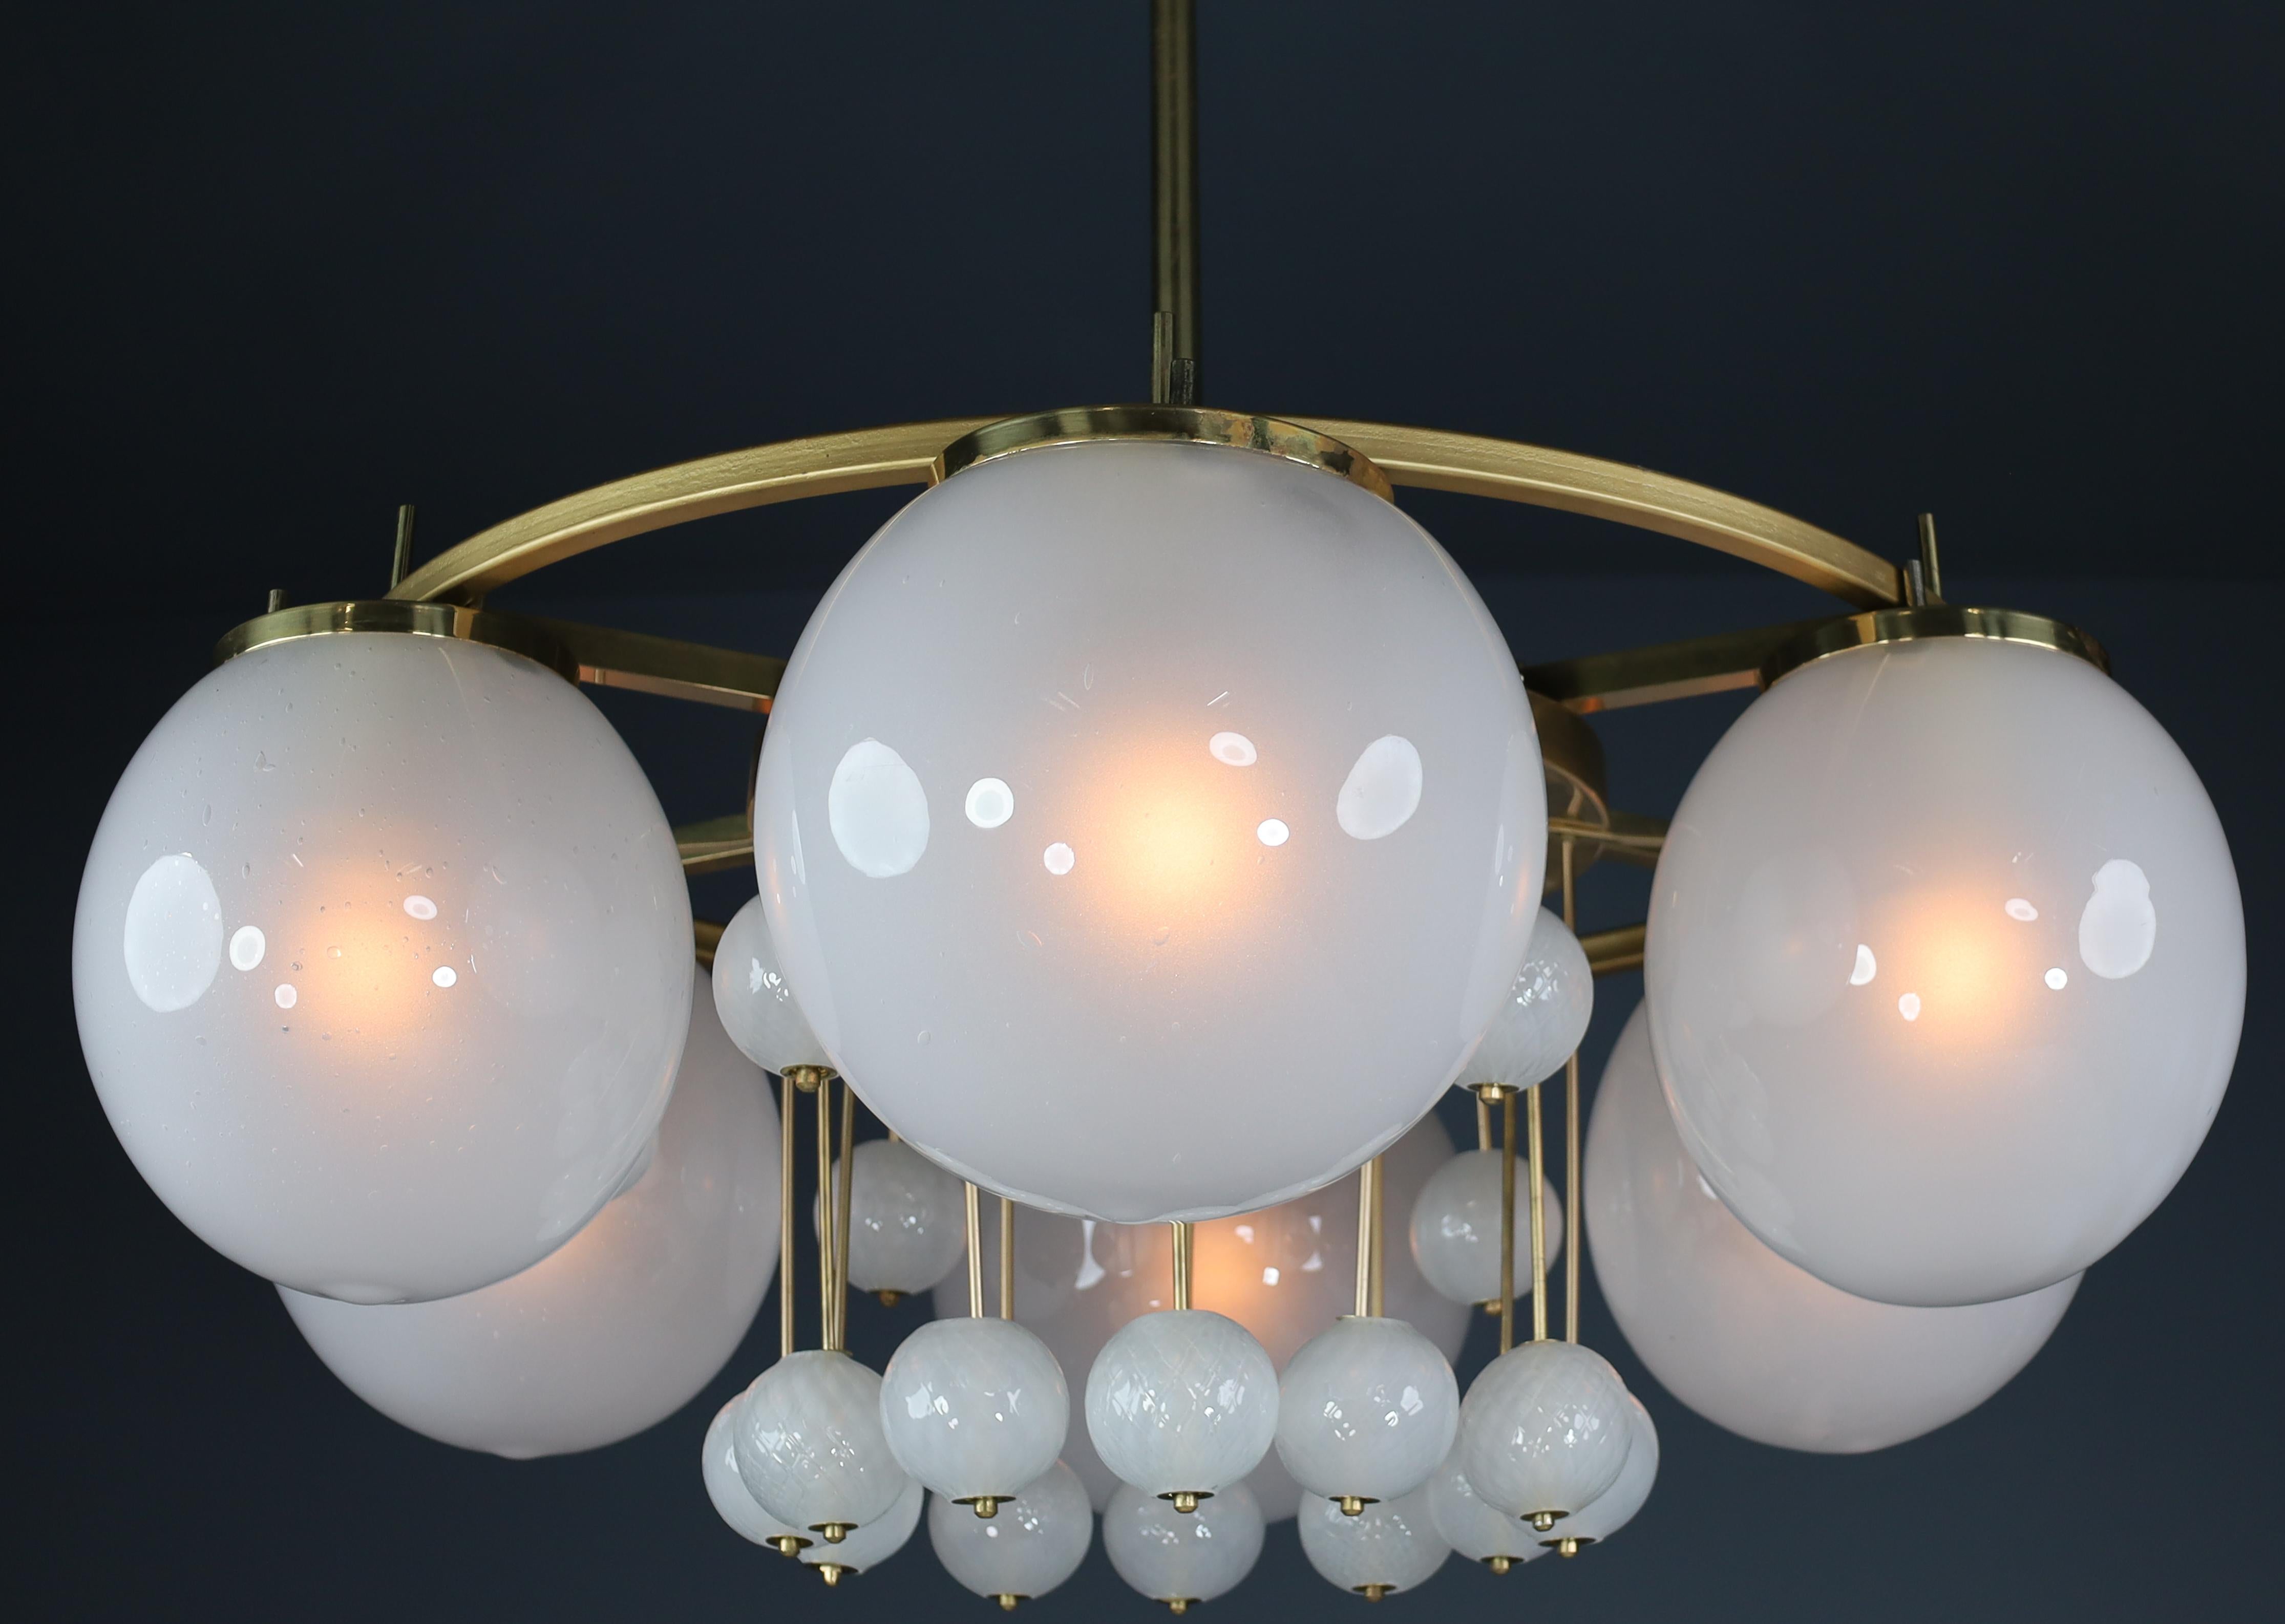 A large brass Bohemian chandelier with frosted glass globes, the 1950s

A magnific chandelier with brass fixture produced and designed in Czechia Bohemian in the 1950s. There are six large mouthblown, frosted glass globes, and 18 smaller